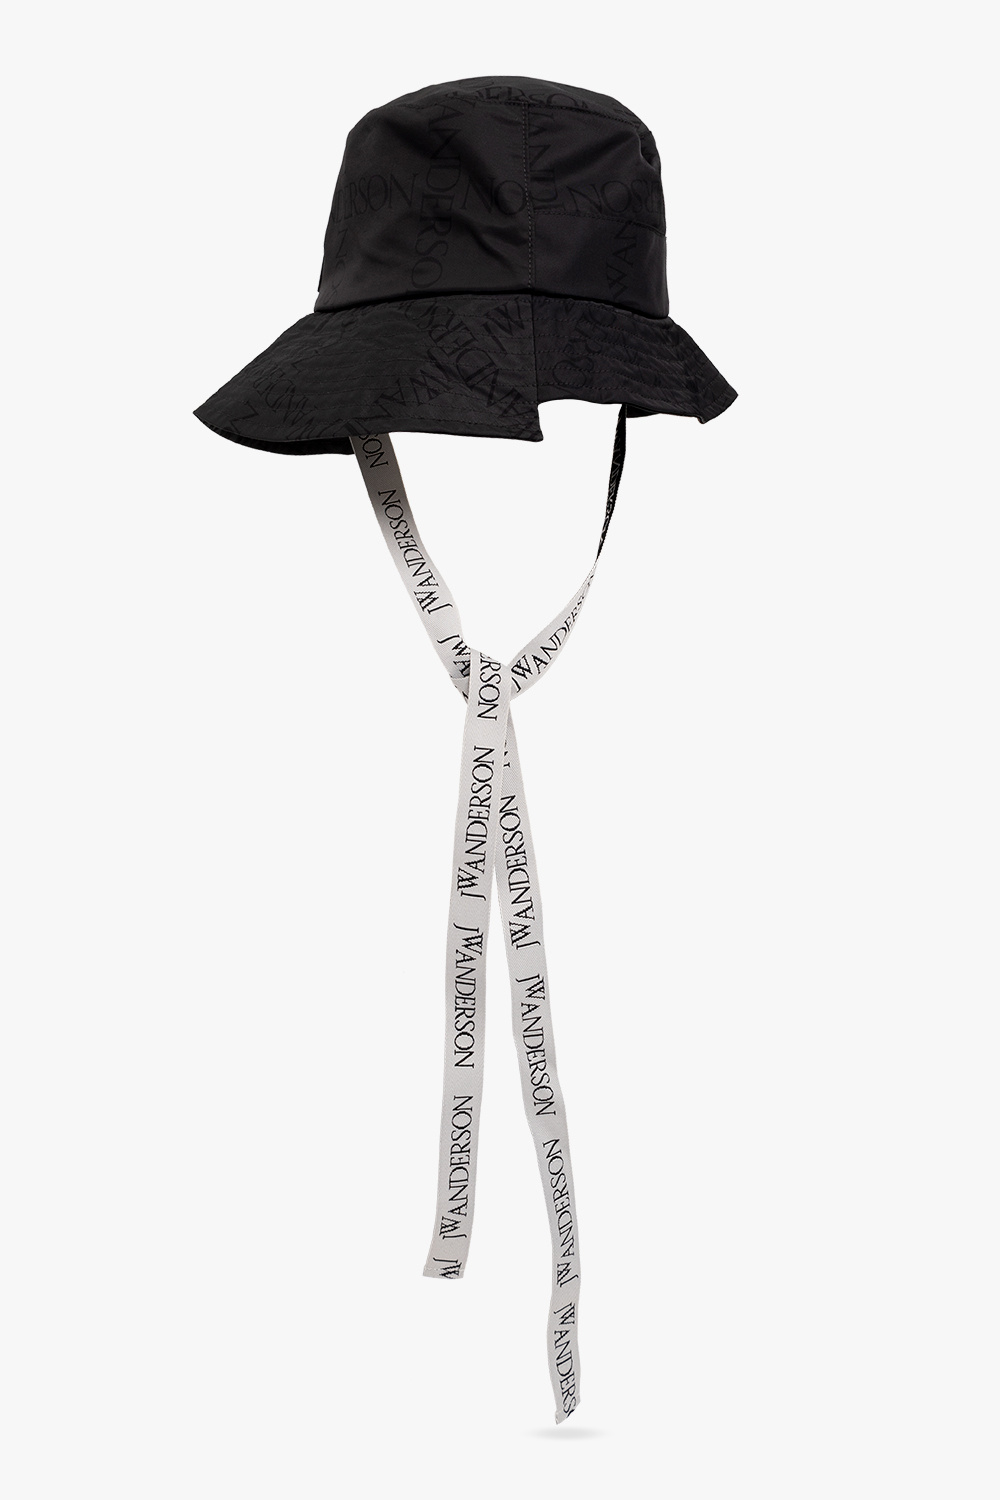 JW Anderson Bucket hat box with logo